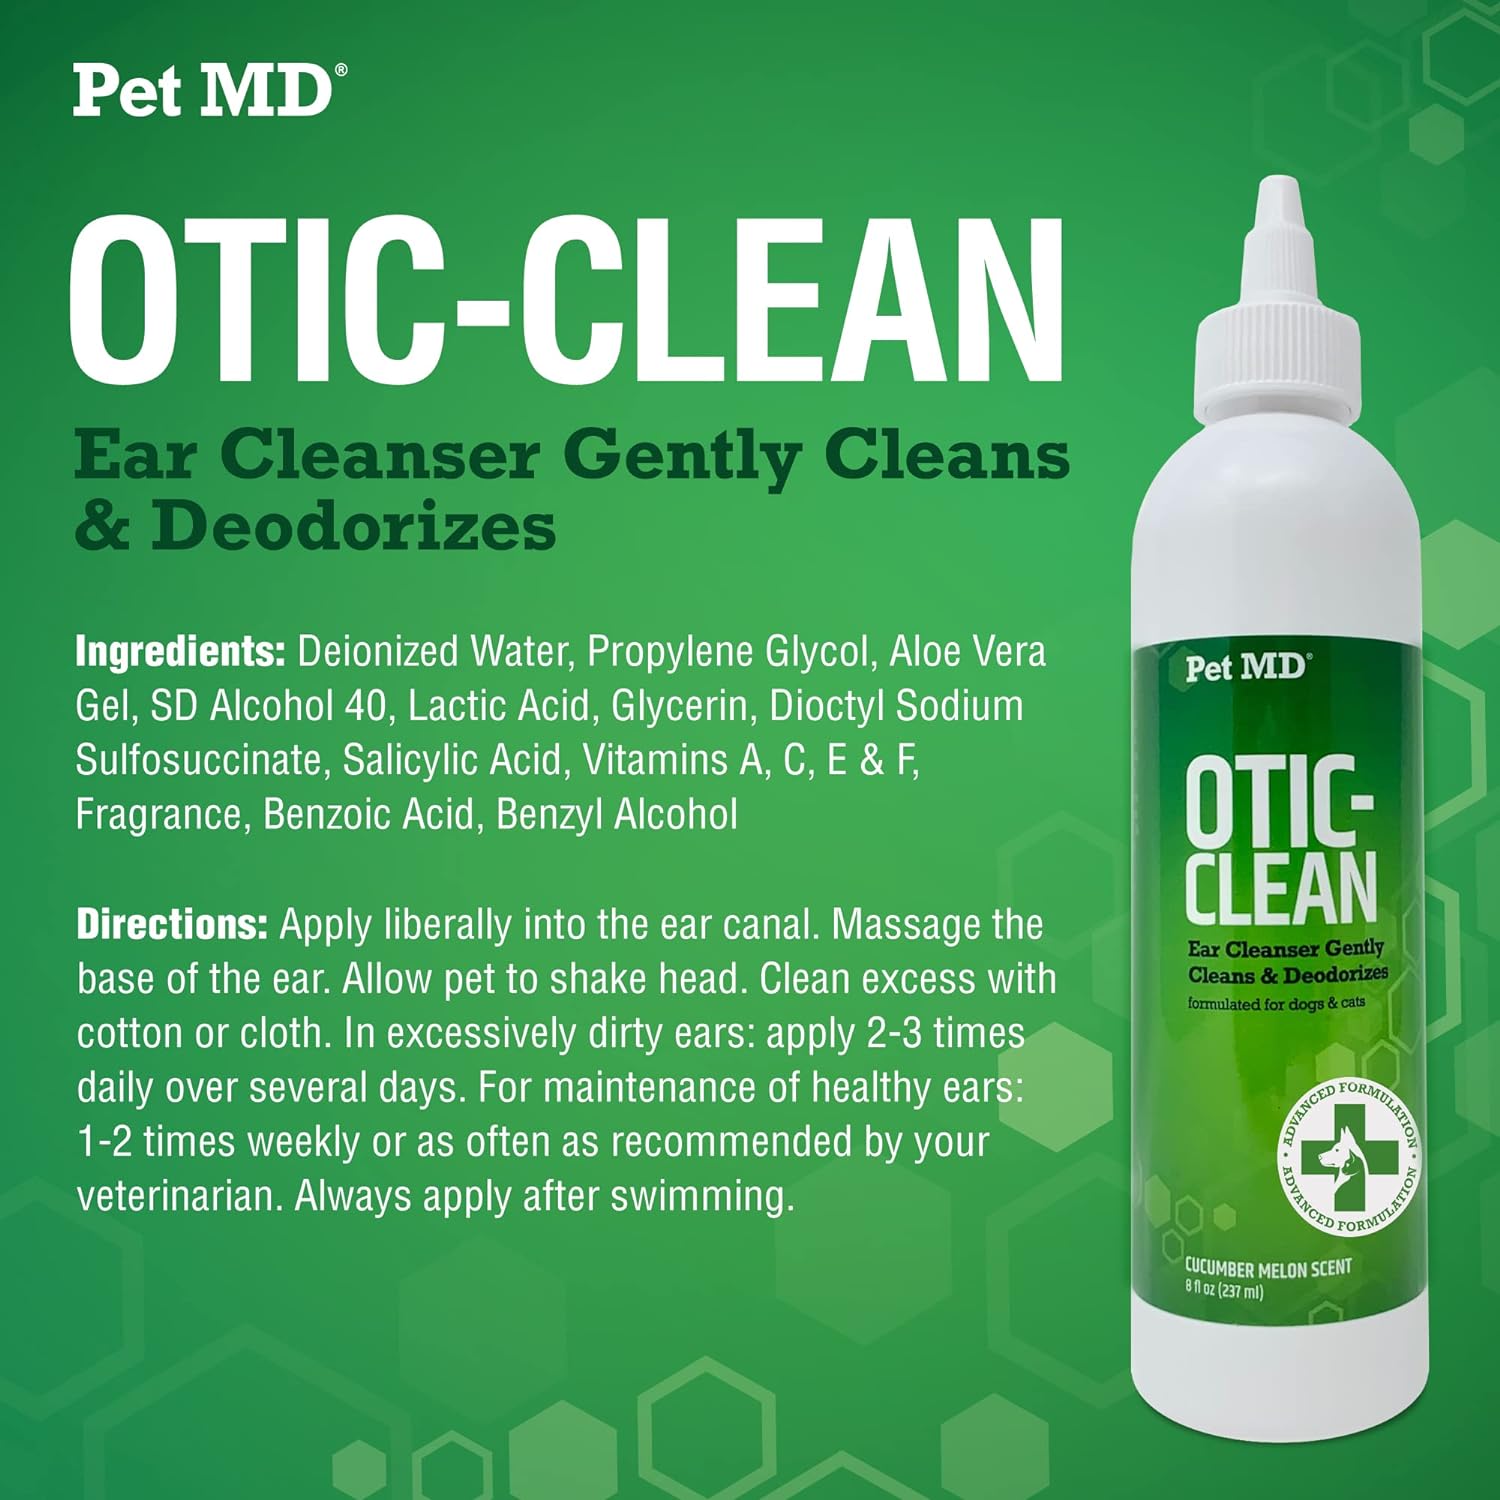 Pet MD Otic Clean Dog Ear Cleaner for Cats and Dogs - Effective Against Infections Caused by Infections, Itching and Controls Ear Odor - 8 oz (Cucumber Melon) : Pet Supplies